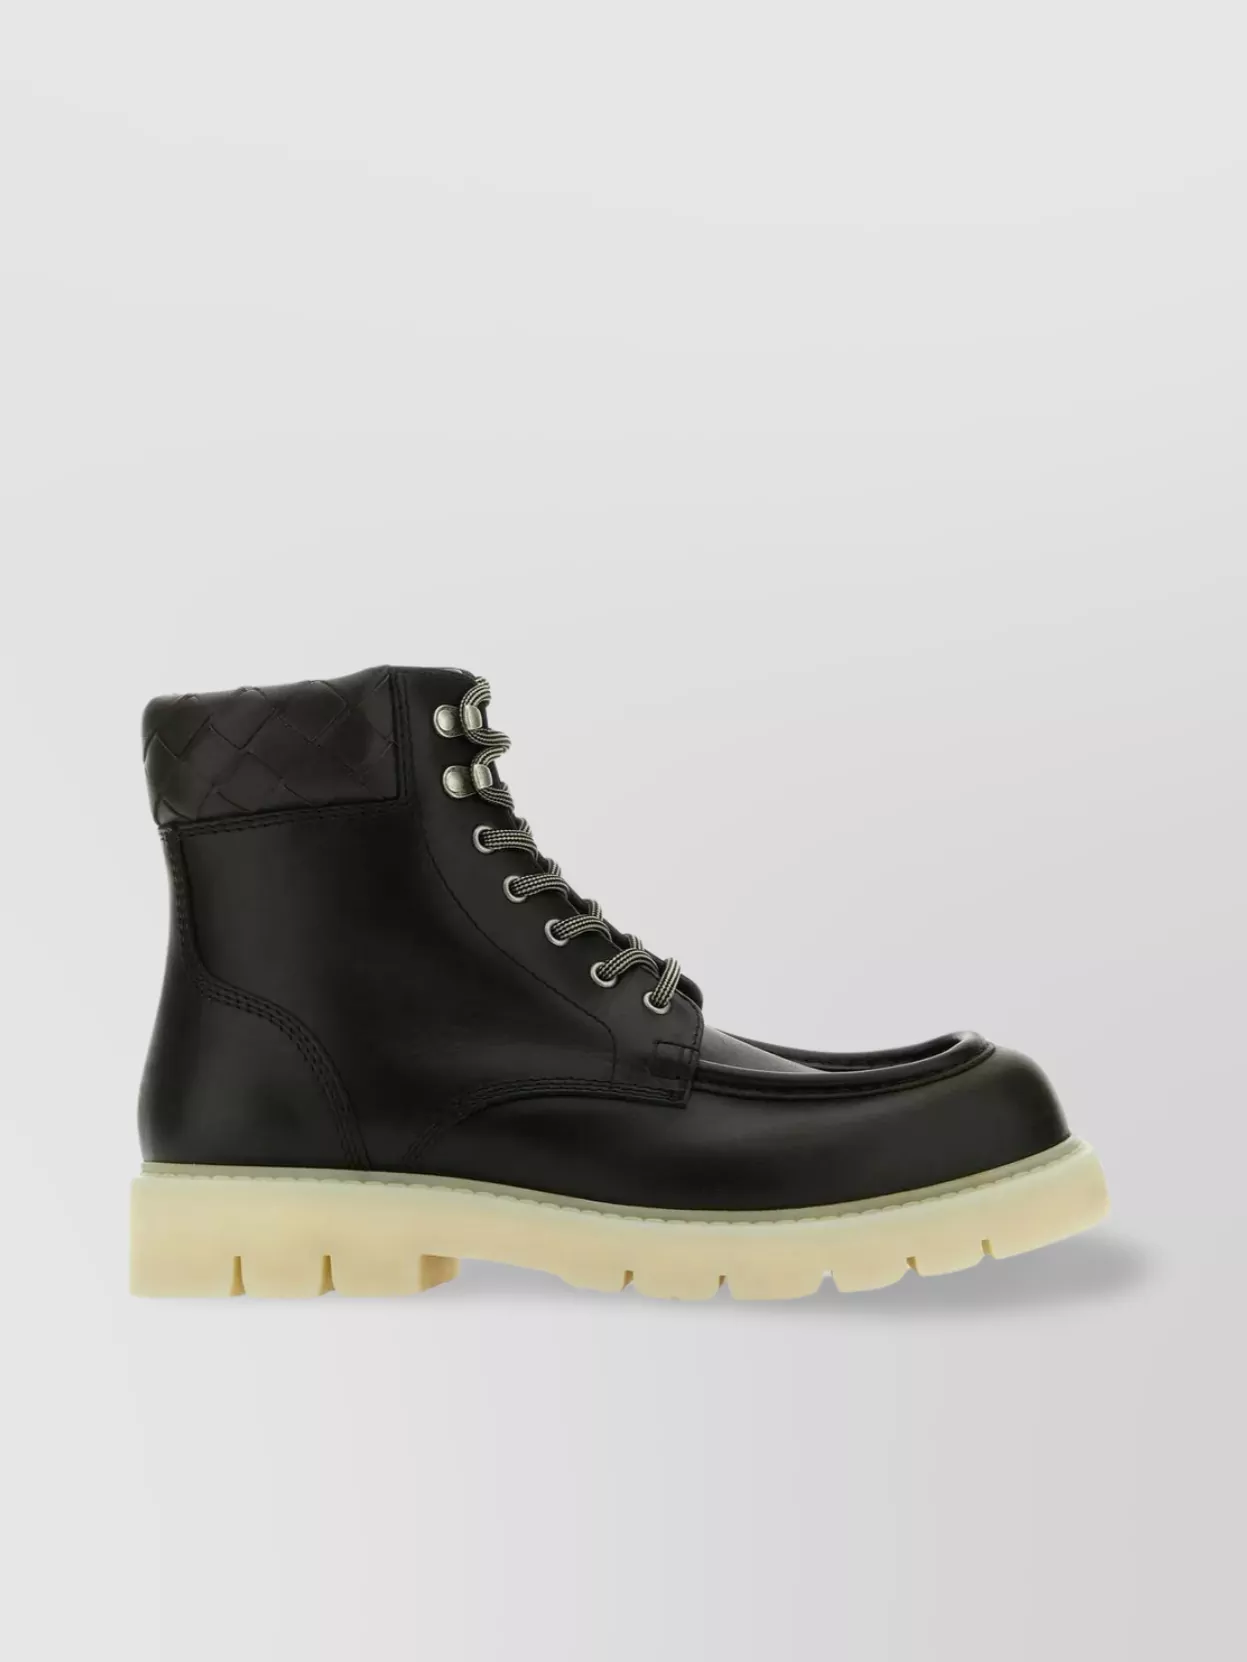 Shop Bottega Veneta Leather Boots With Padded Ankle And Squared Toe